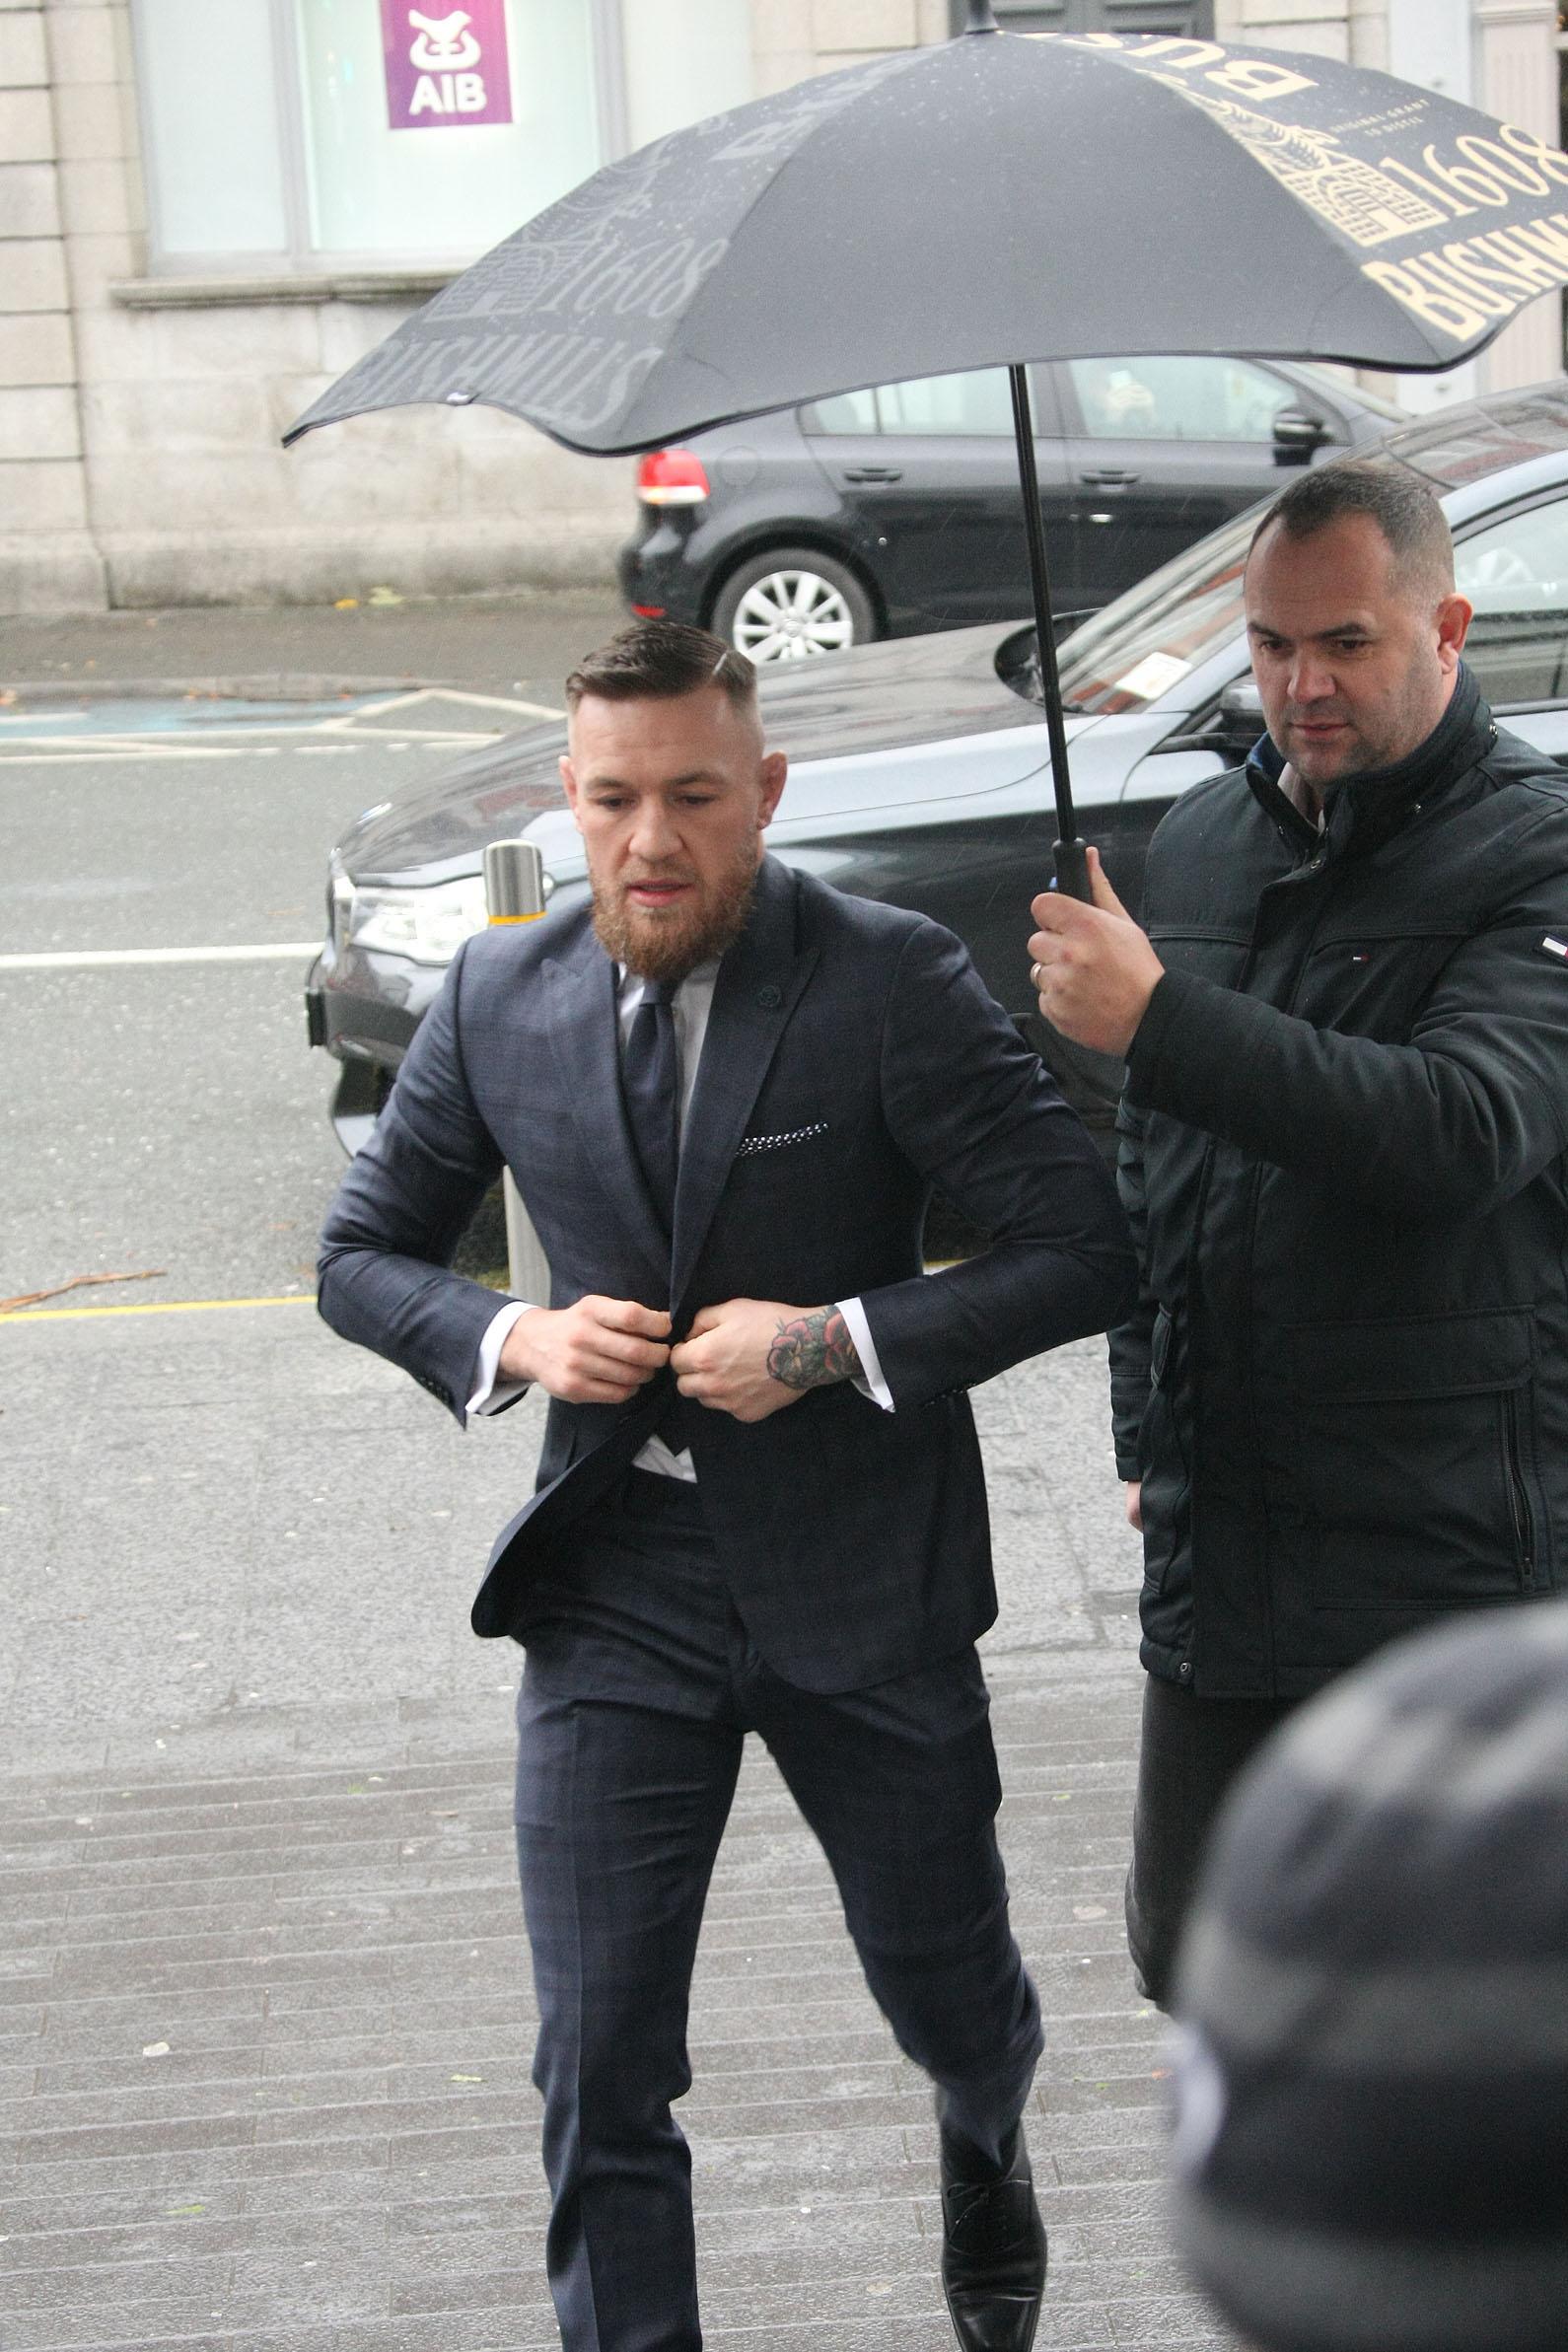 Conor McGregor at the NAAS courthouse in Co.Kildare where he was fined 1,000 Euro & banned from driving for 6 months for a speeding offense.